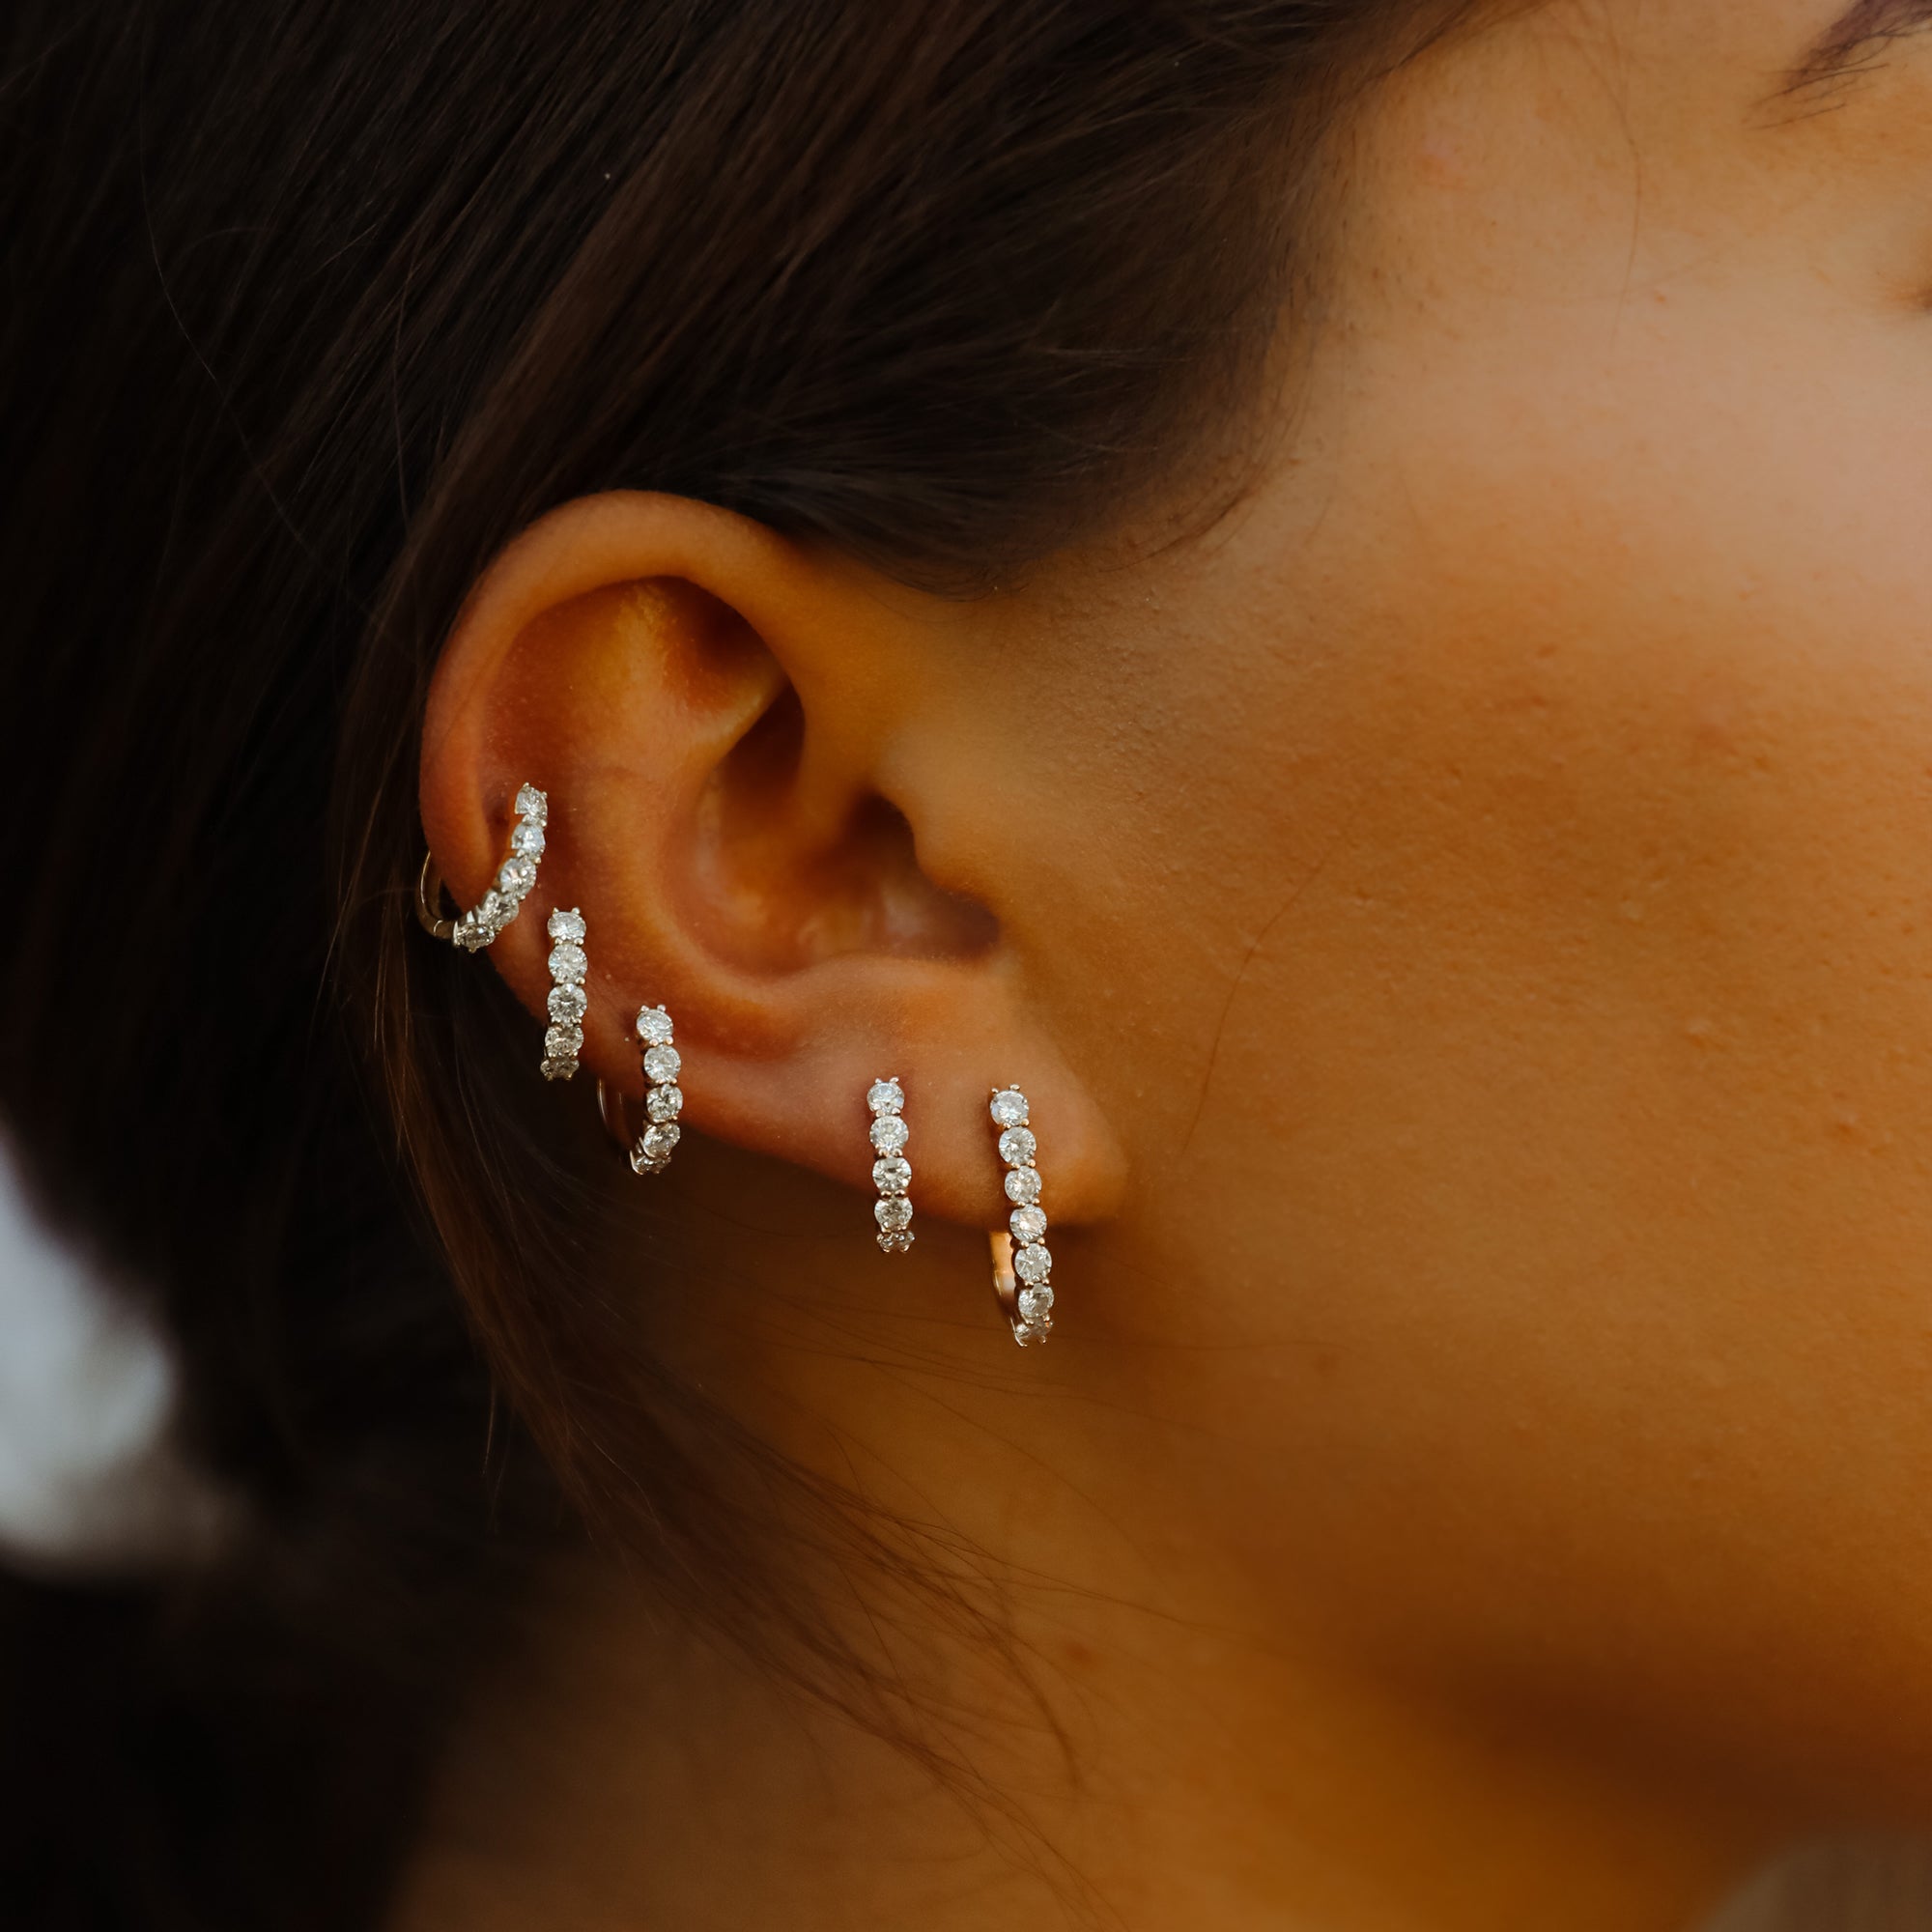 Our Sparkler Huggies shown stacked along the ear with the Sparkler Pin Earrings.